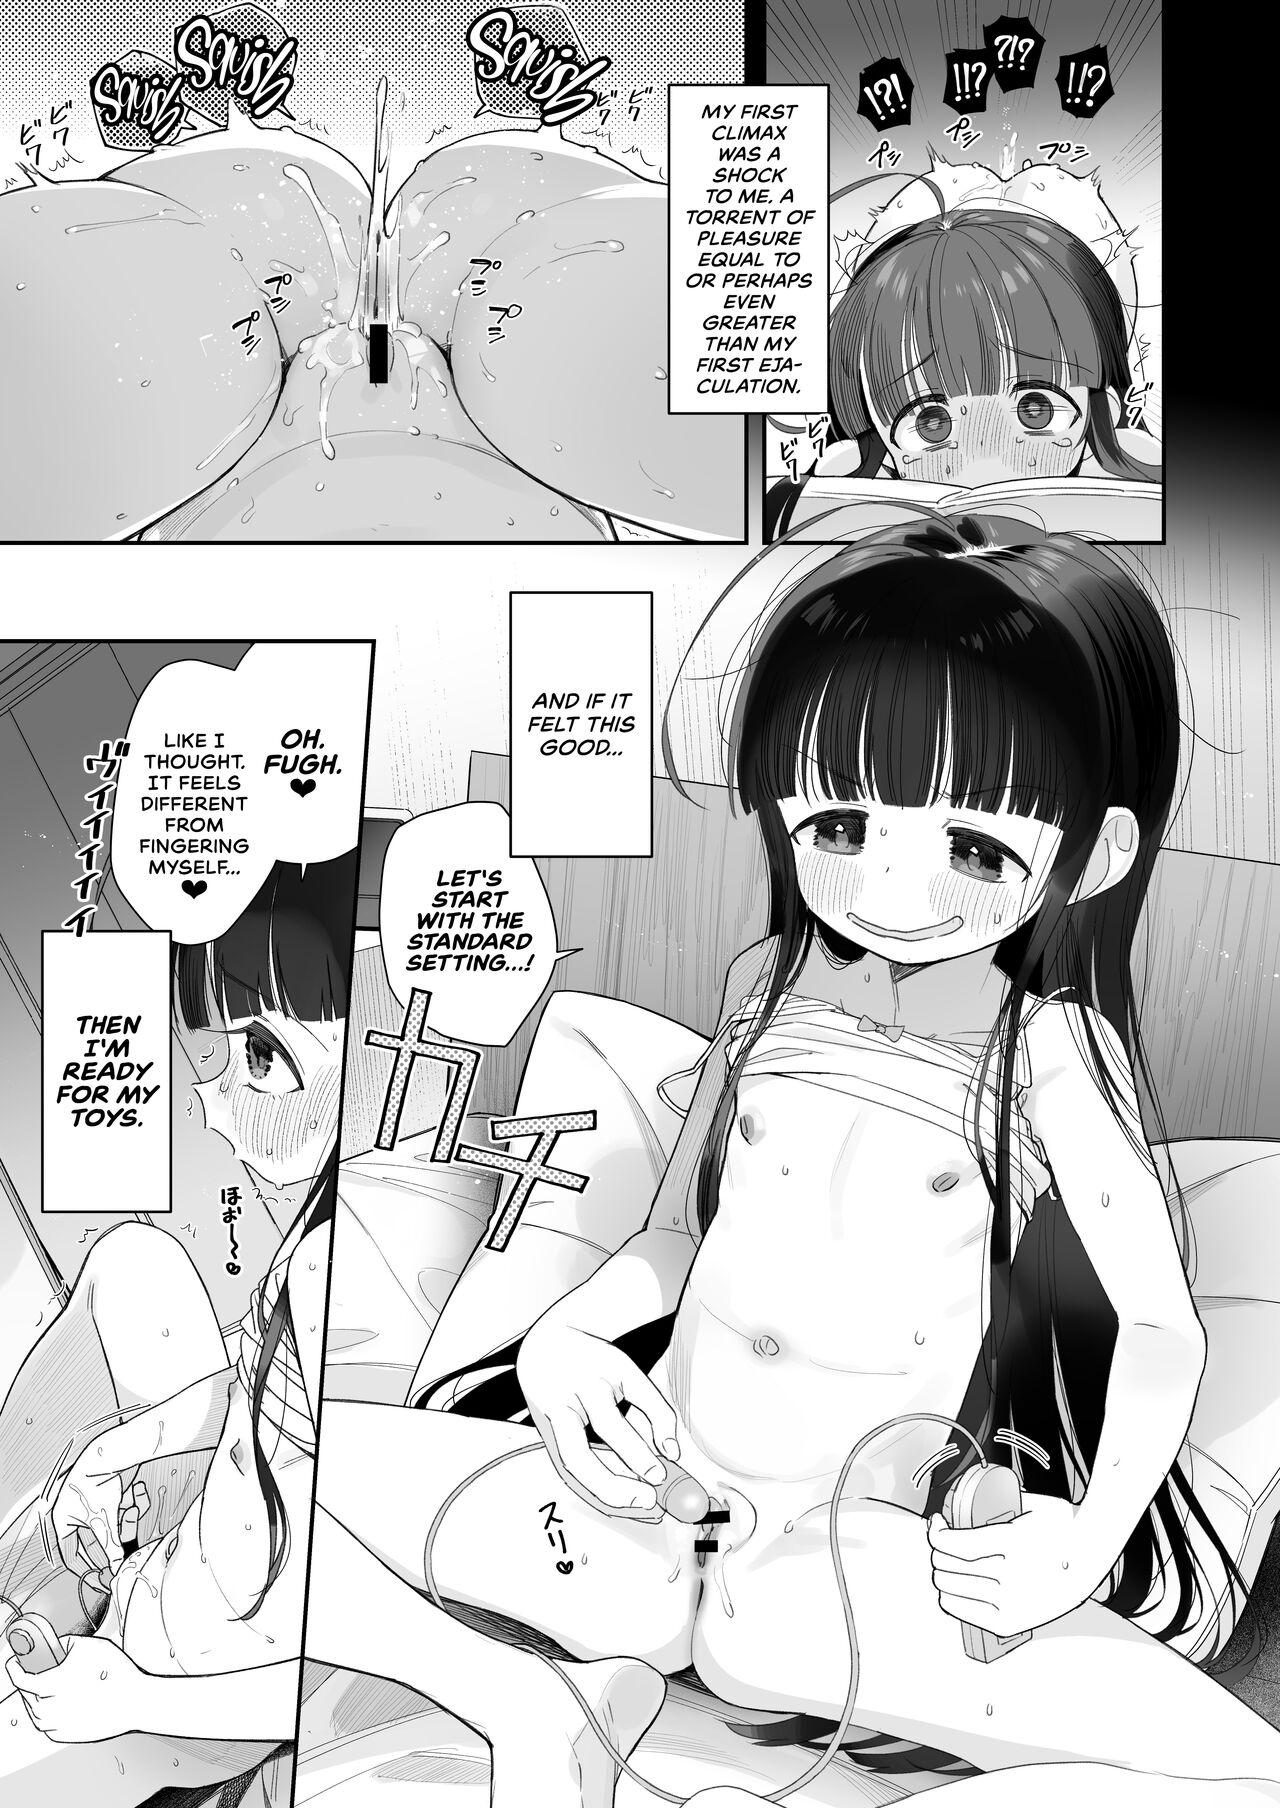 [Asunaro Neat. (Ronna)] TS Loli Oji-san no Bouken Onanie Hen | The Adventures of an Old Man Who Was Gender-Swapped Into a Loli ~Masturbation Chapter~ [English] [CulturedCommissions] [Digital] 21